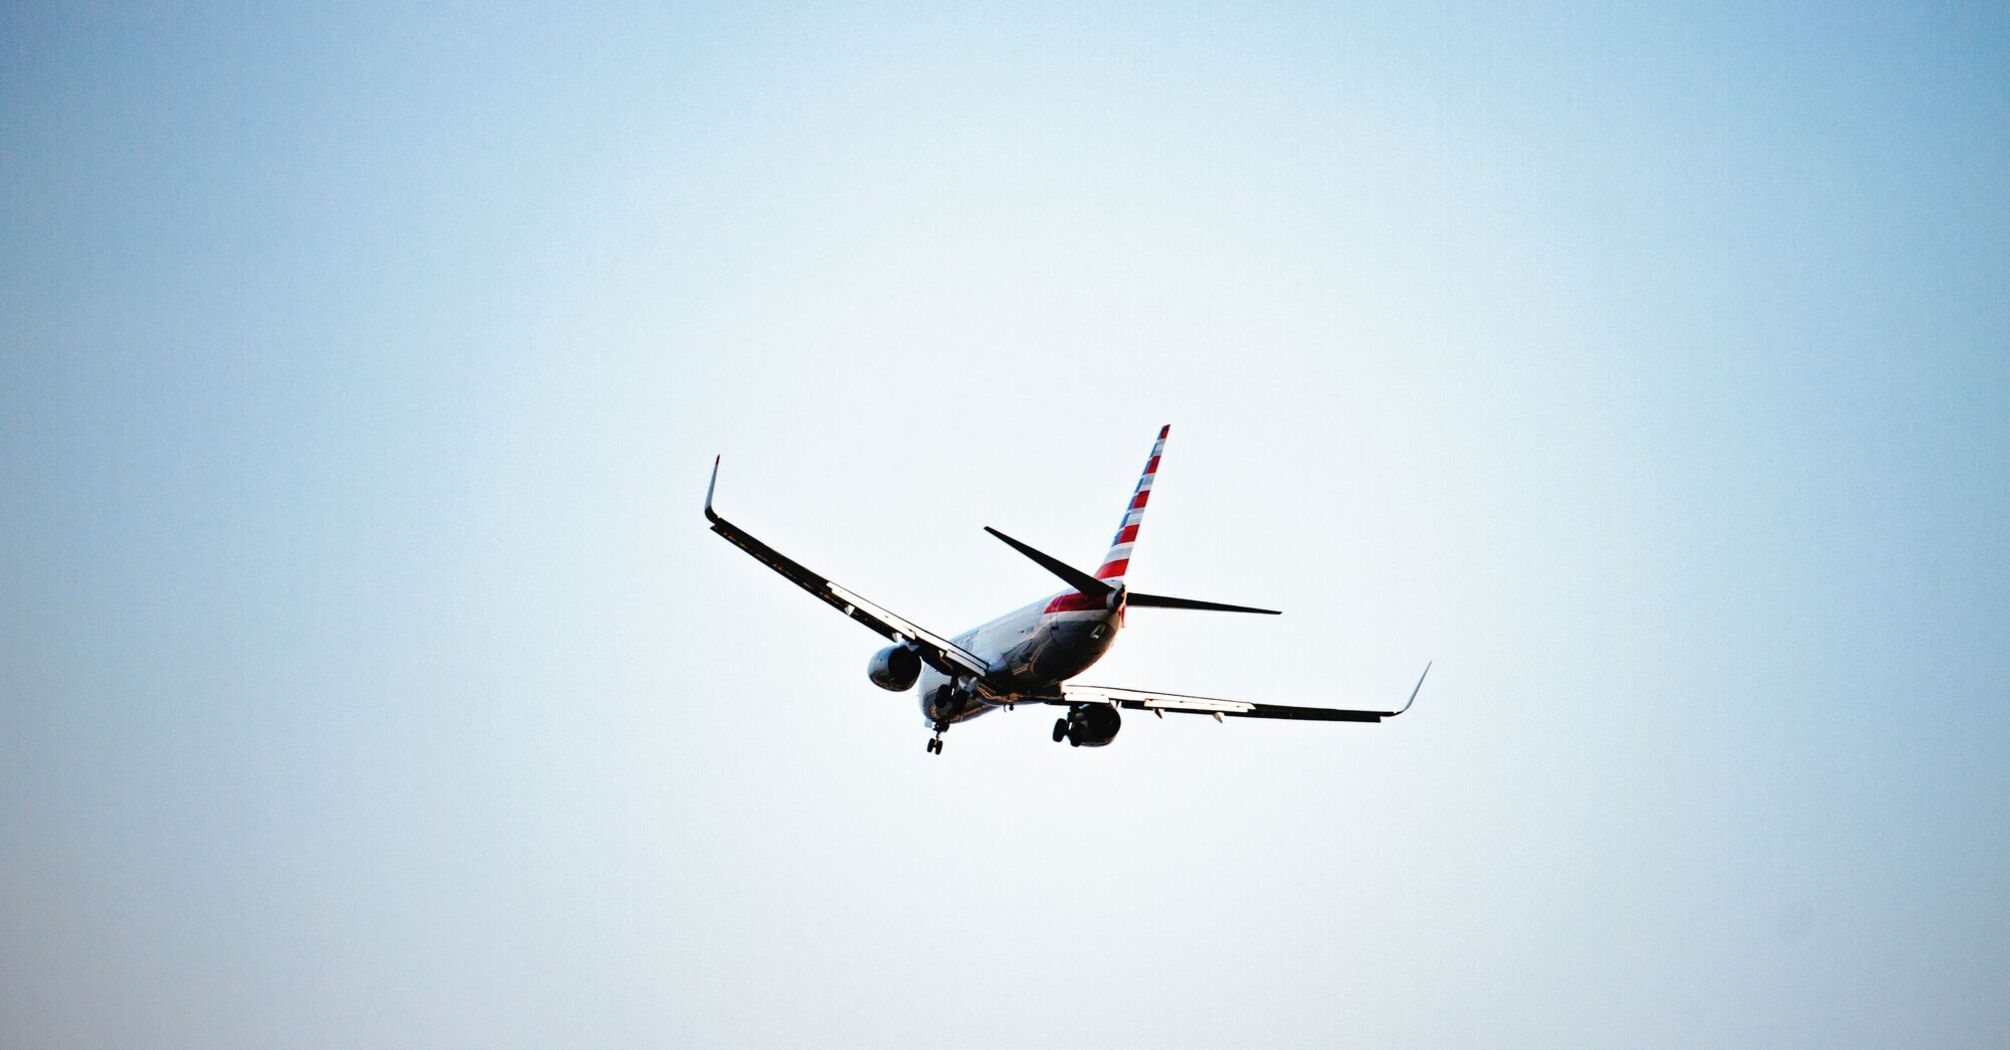 white American Airlines airplane in flight